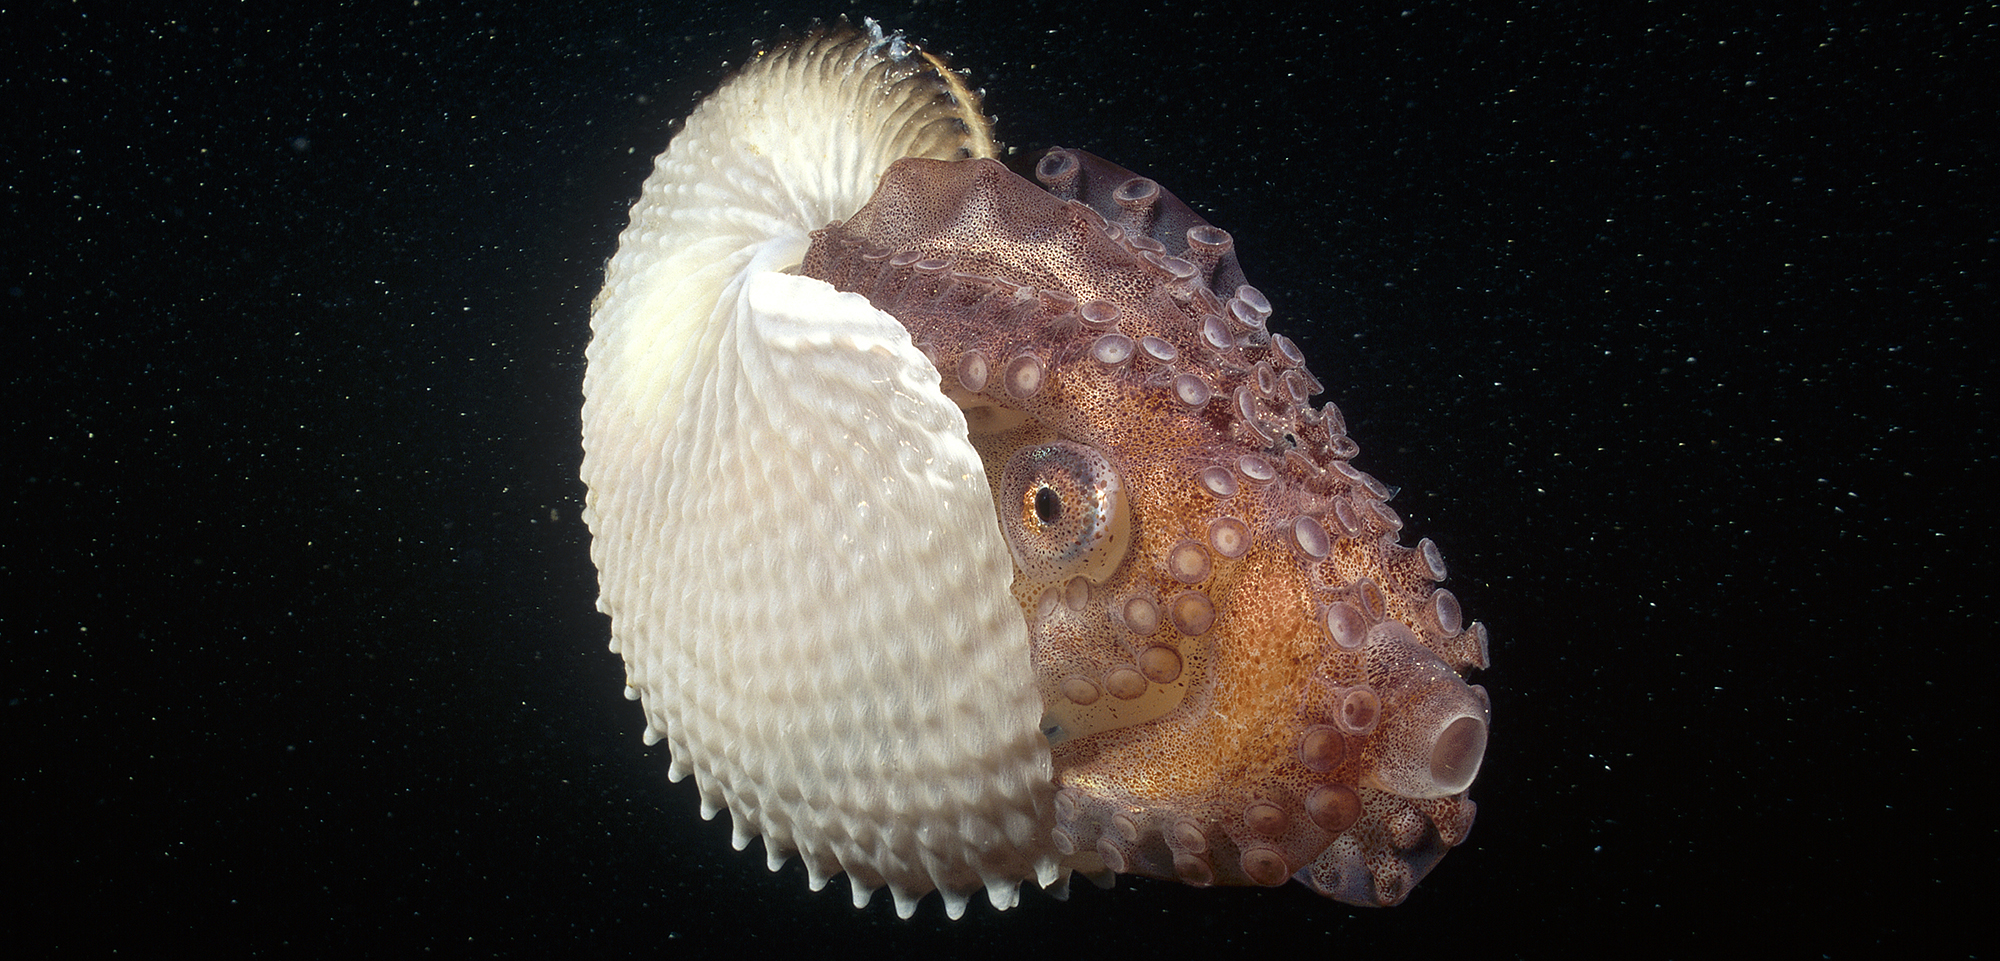 Some female paper nautiluses, shell included, can be more than half a meter long. Photo by Fred Bavendam/Minden Pictures/Corbis